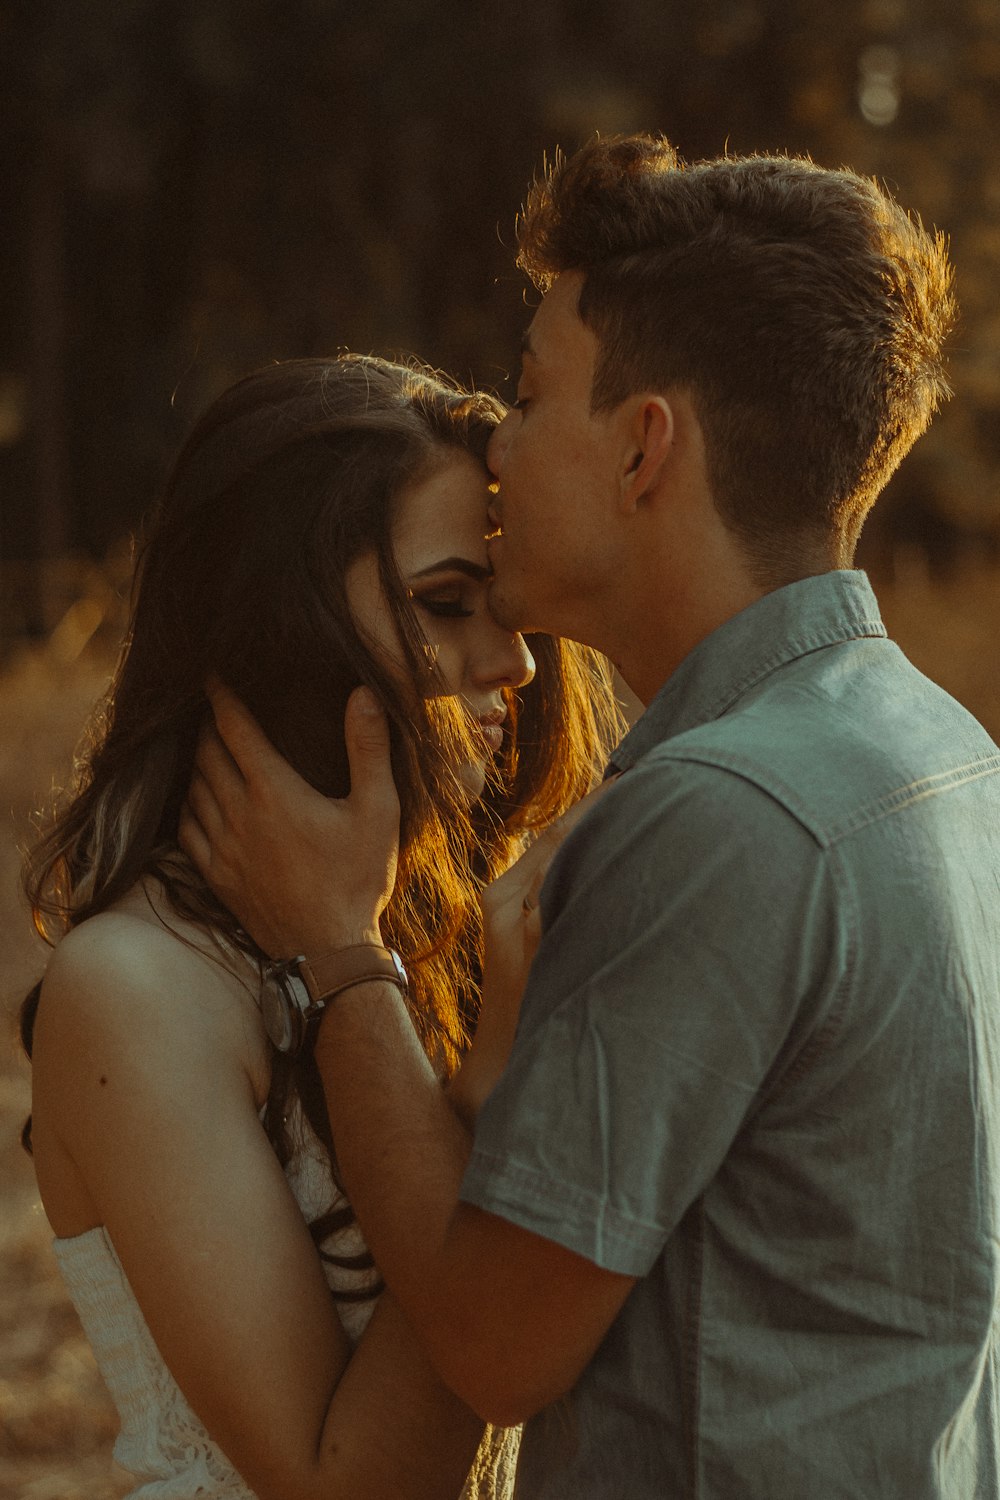 Loveable Couple Pictures | Download Free Images on Unsplash